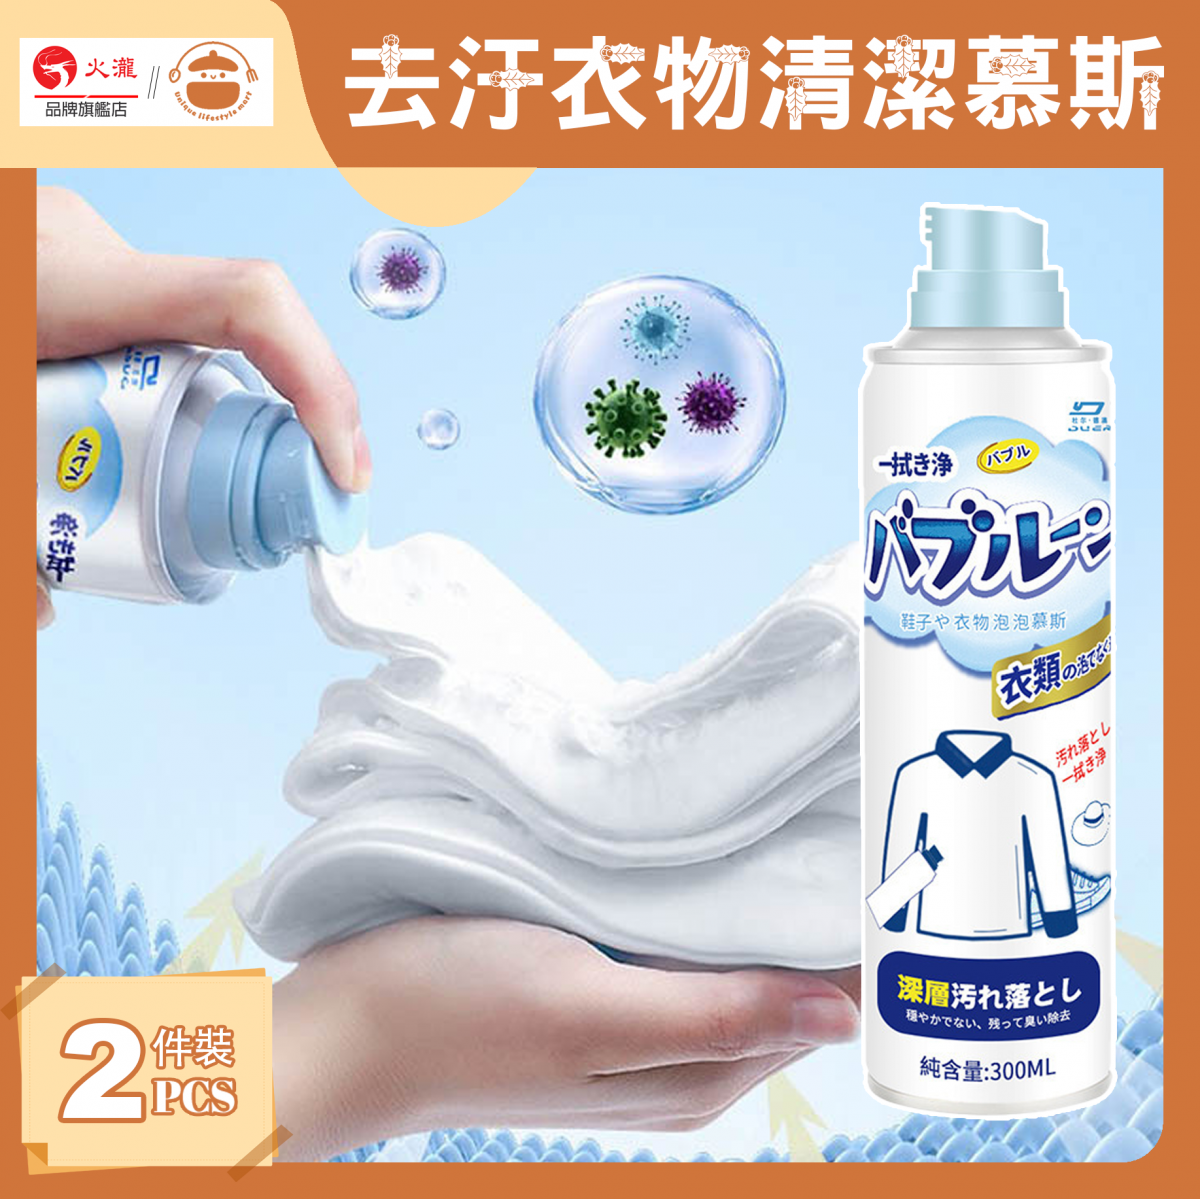 Strong Antibacterial and Decontamination Clothes Cleaning Mousse 300ml【2pcs】